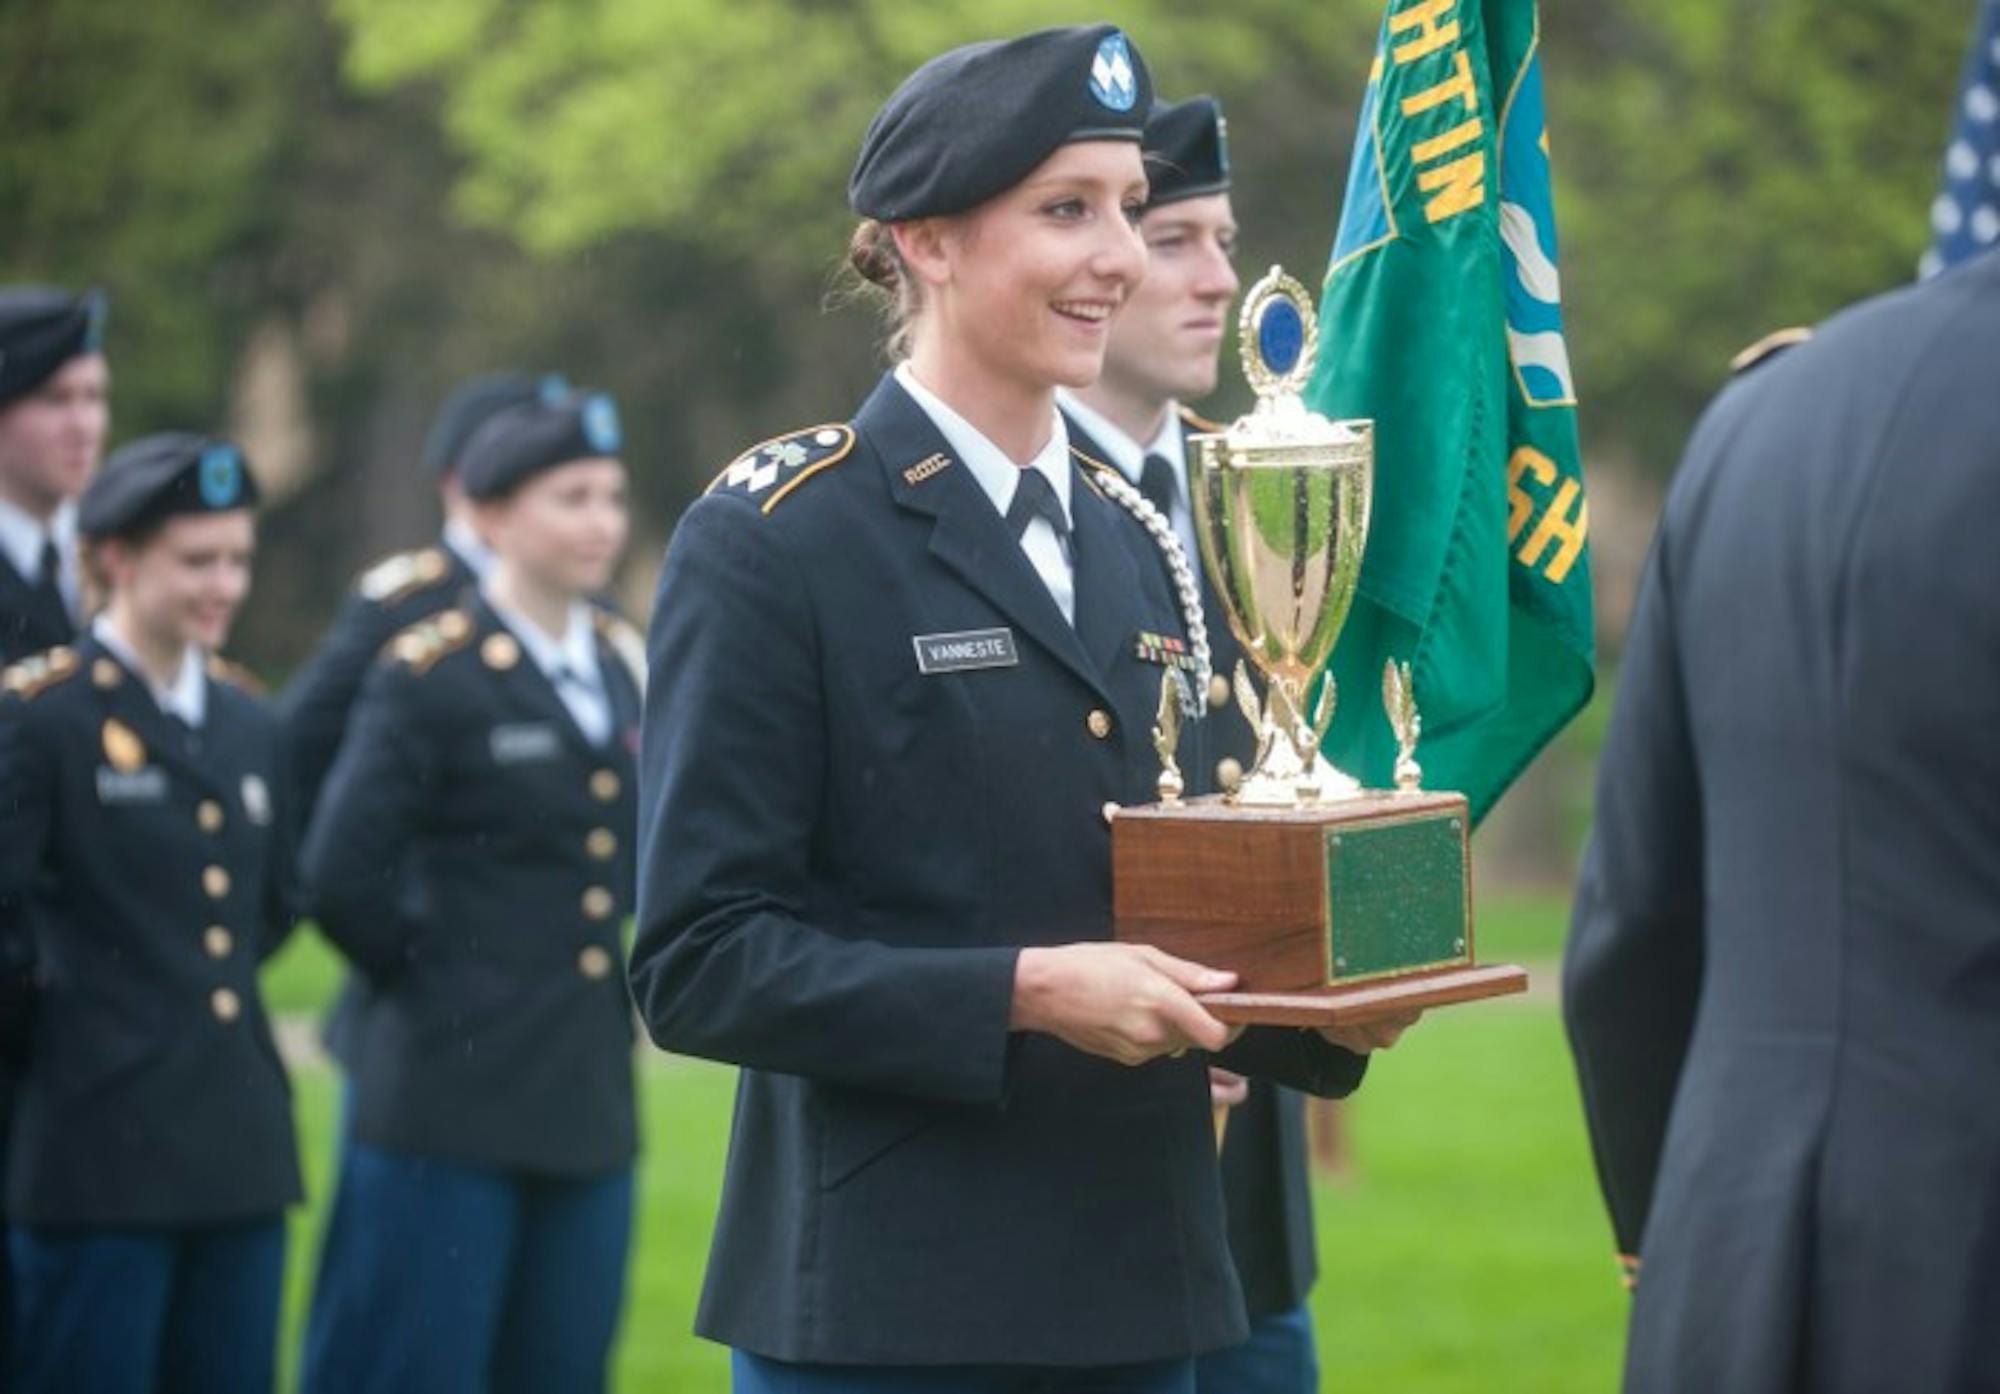 Saint Mary's senior and Army battalion commander Emilie Vanneste accepts an award at the ROTC Pass in Review ceremony Wednesday.